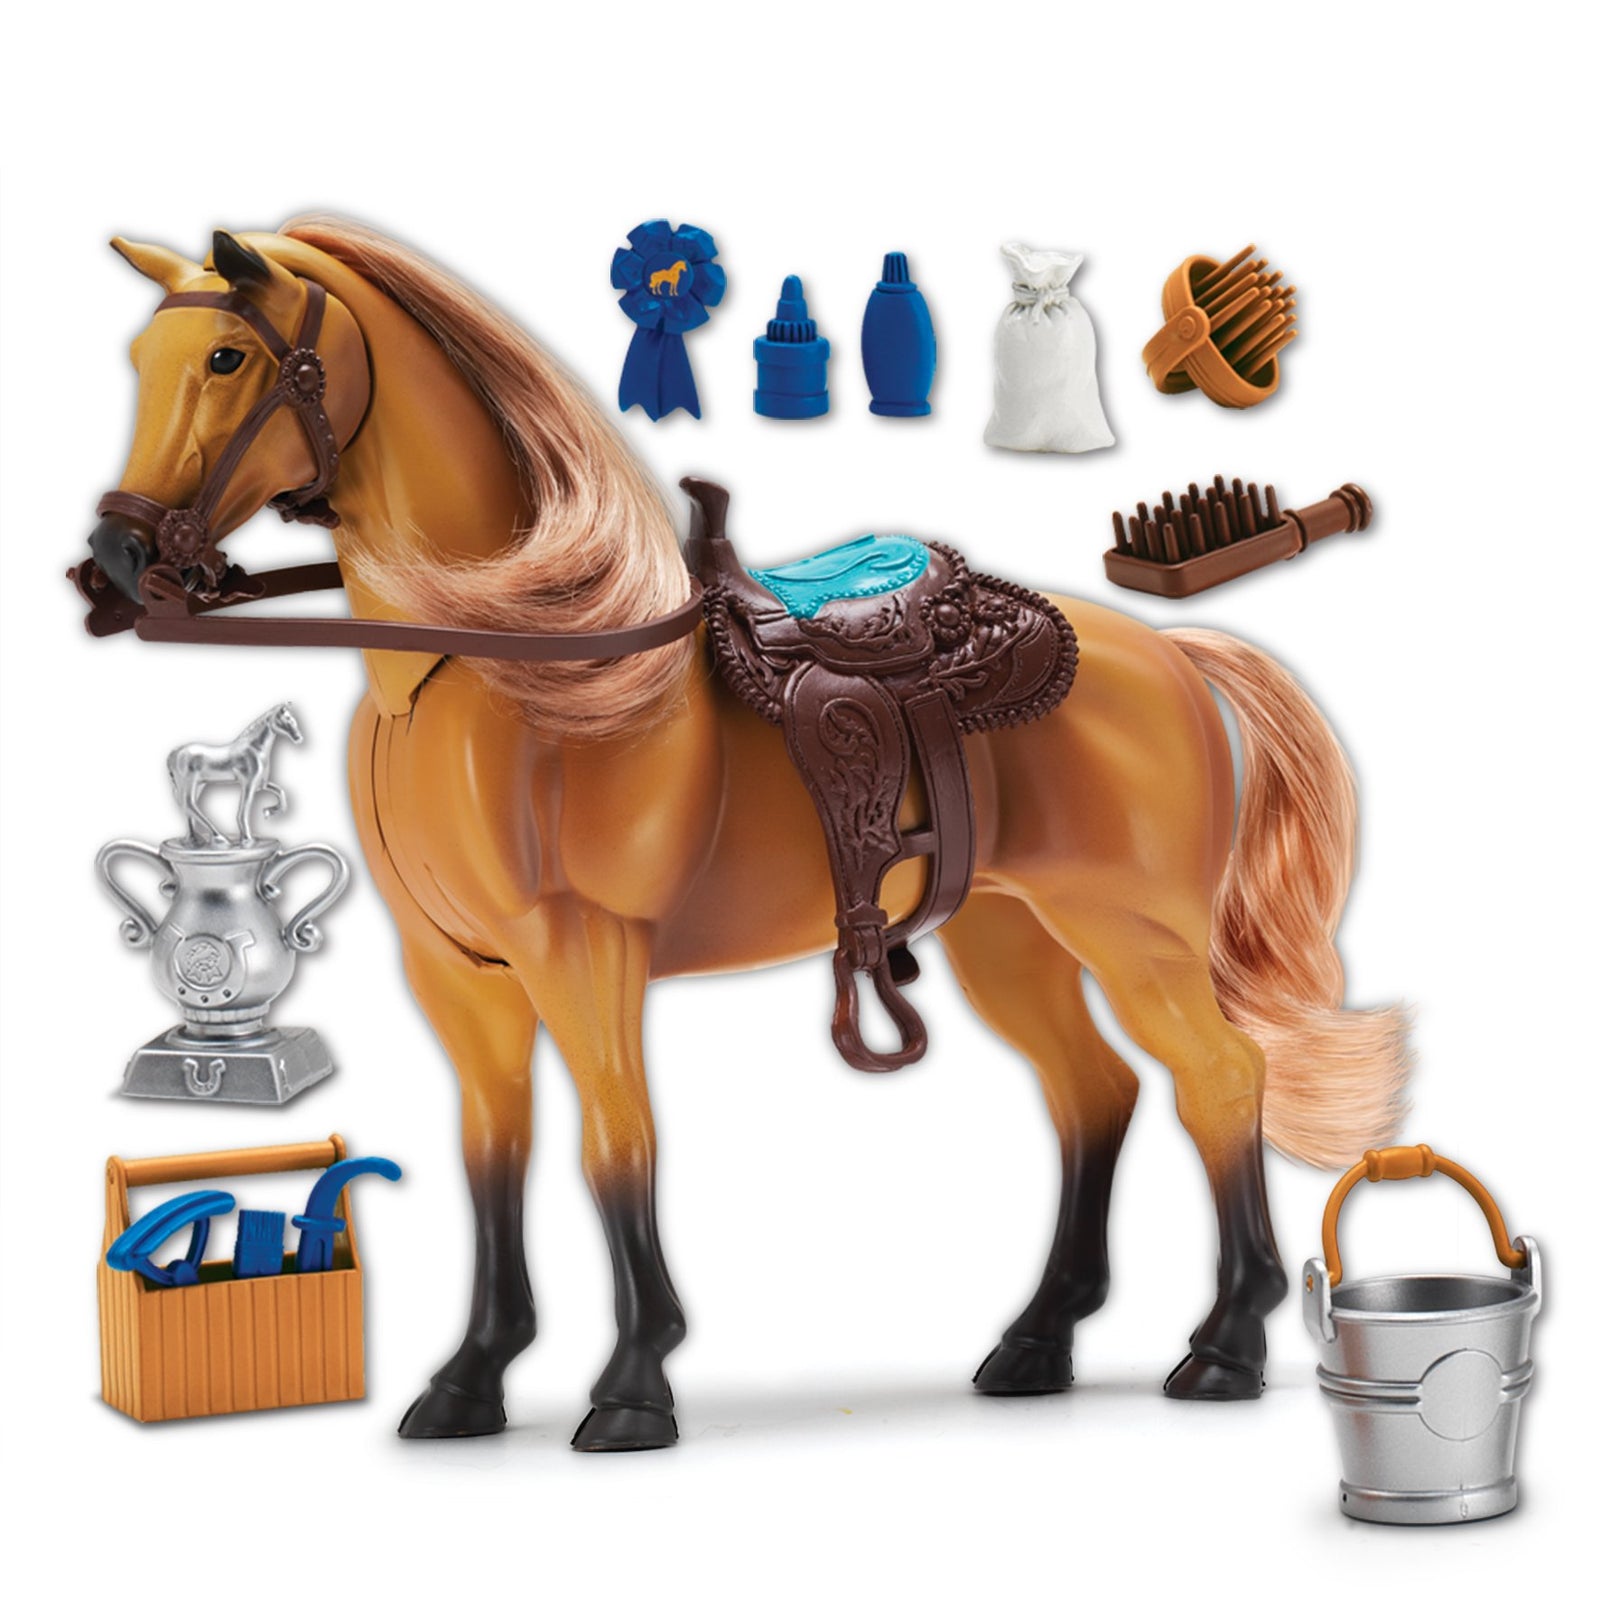 Sunny Days Entertainment Quarter Horse with Moveable Head, Realistic Sound and 14 Grooming Accessories - Blue Ribbon Champions Deluxe Toy Horses